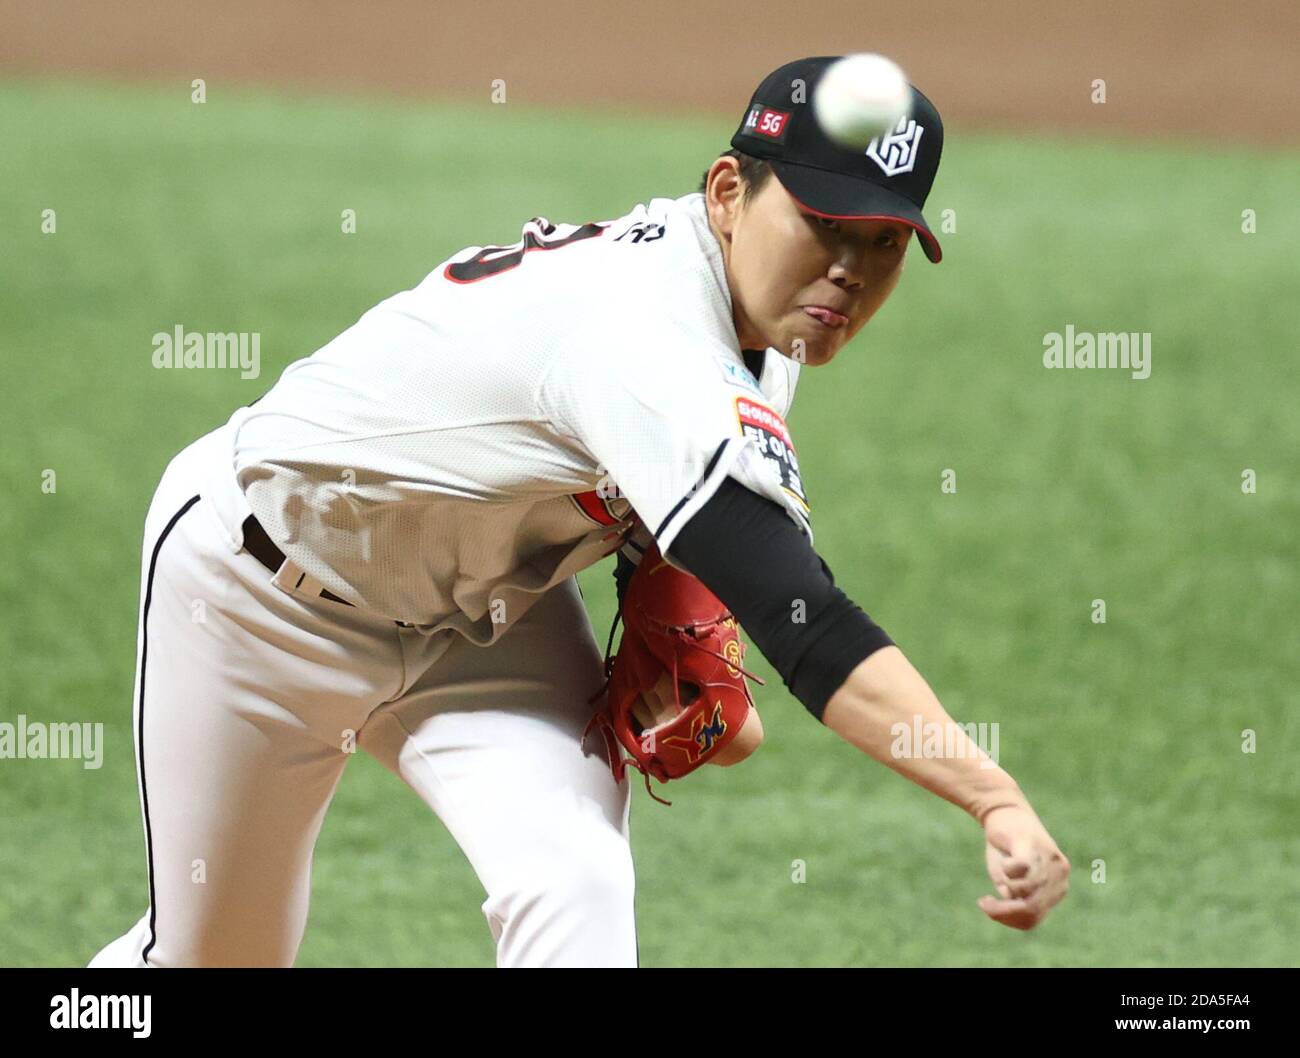 10th Nov, 2020. KBO postseason series So Hyeong-jun of the KT Wiz pitches  against the Doosan Bears in the top of the first inning of Game 1 of the  Korea Baseball Organization